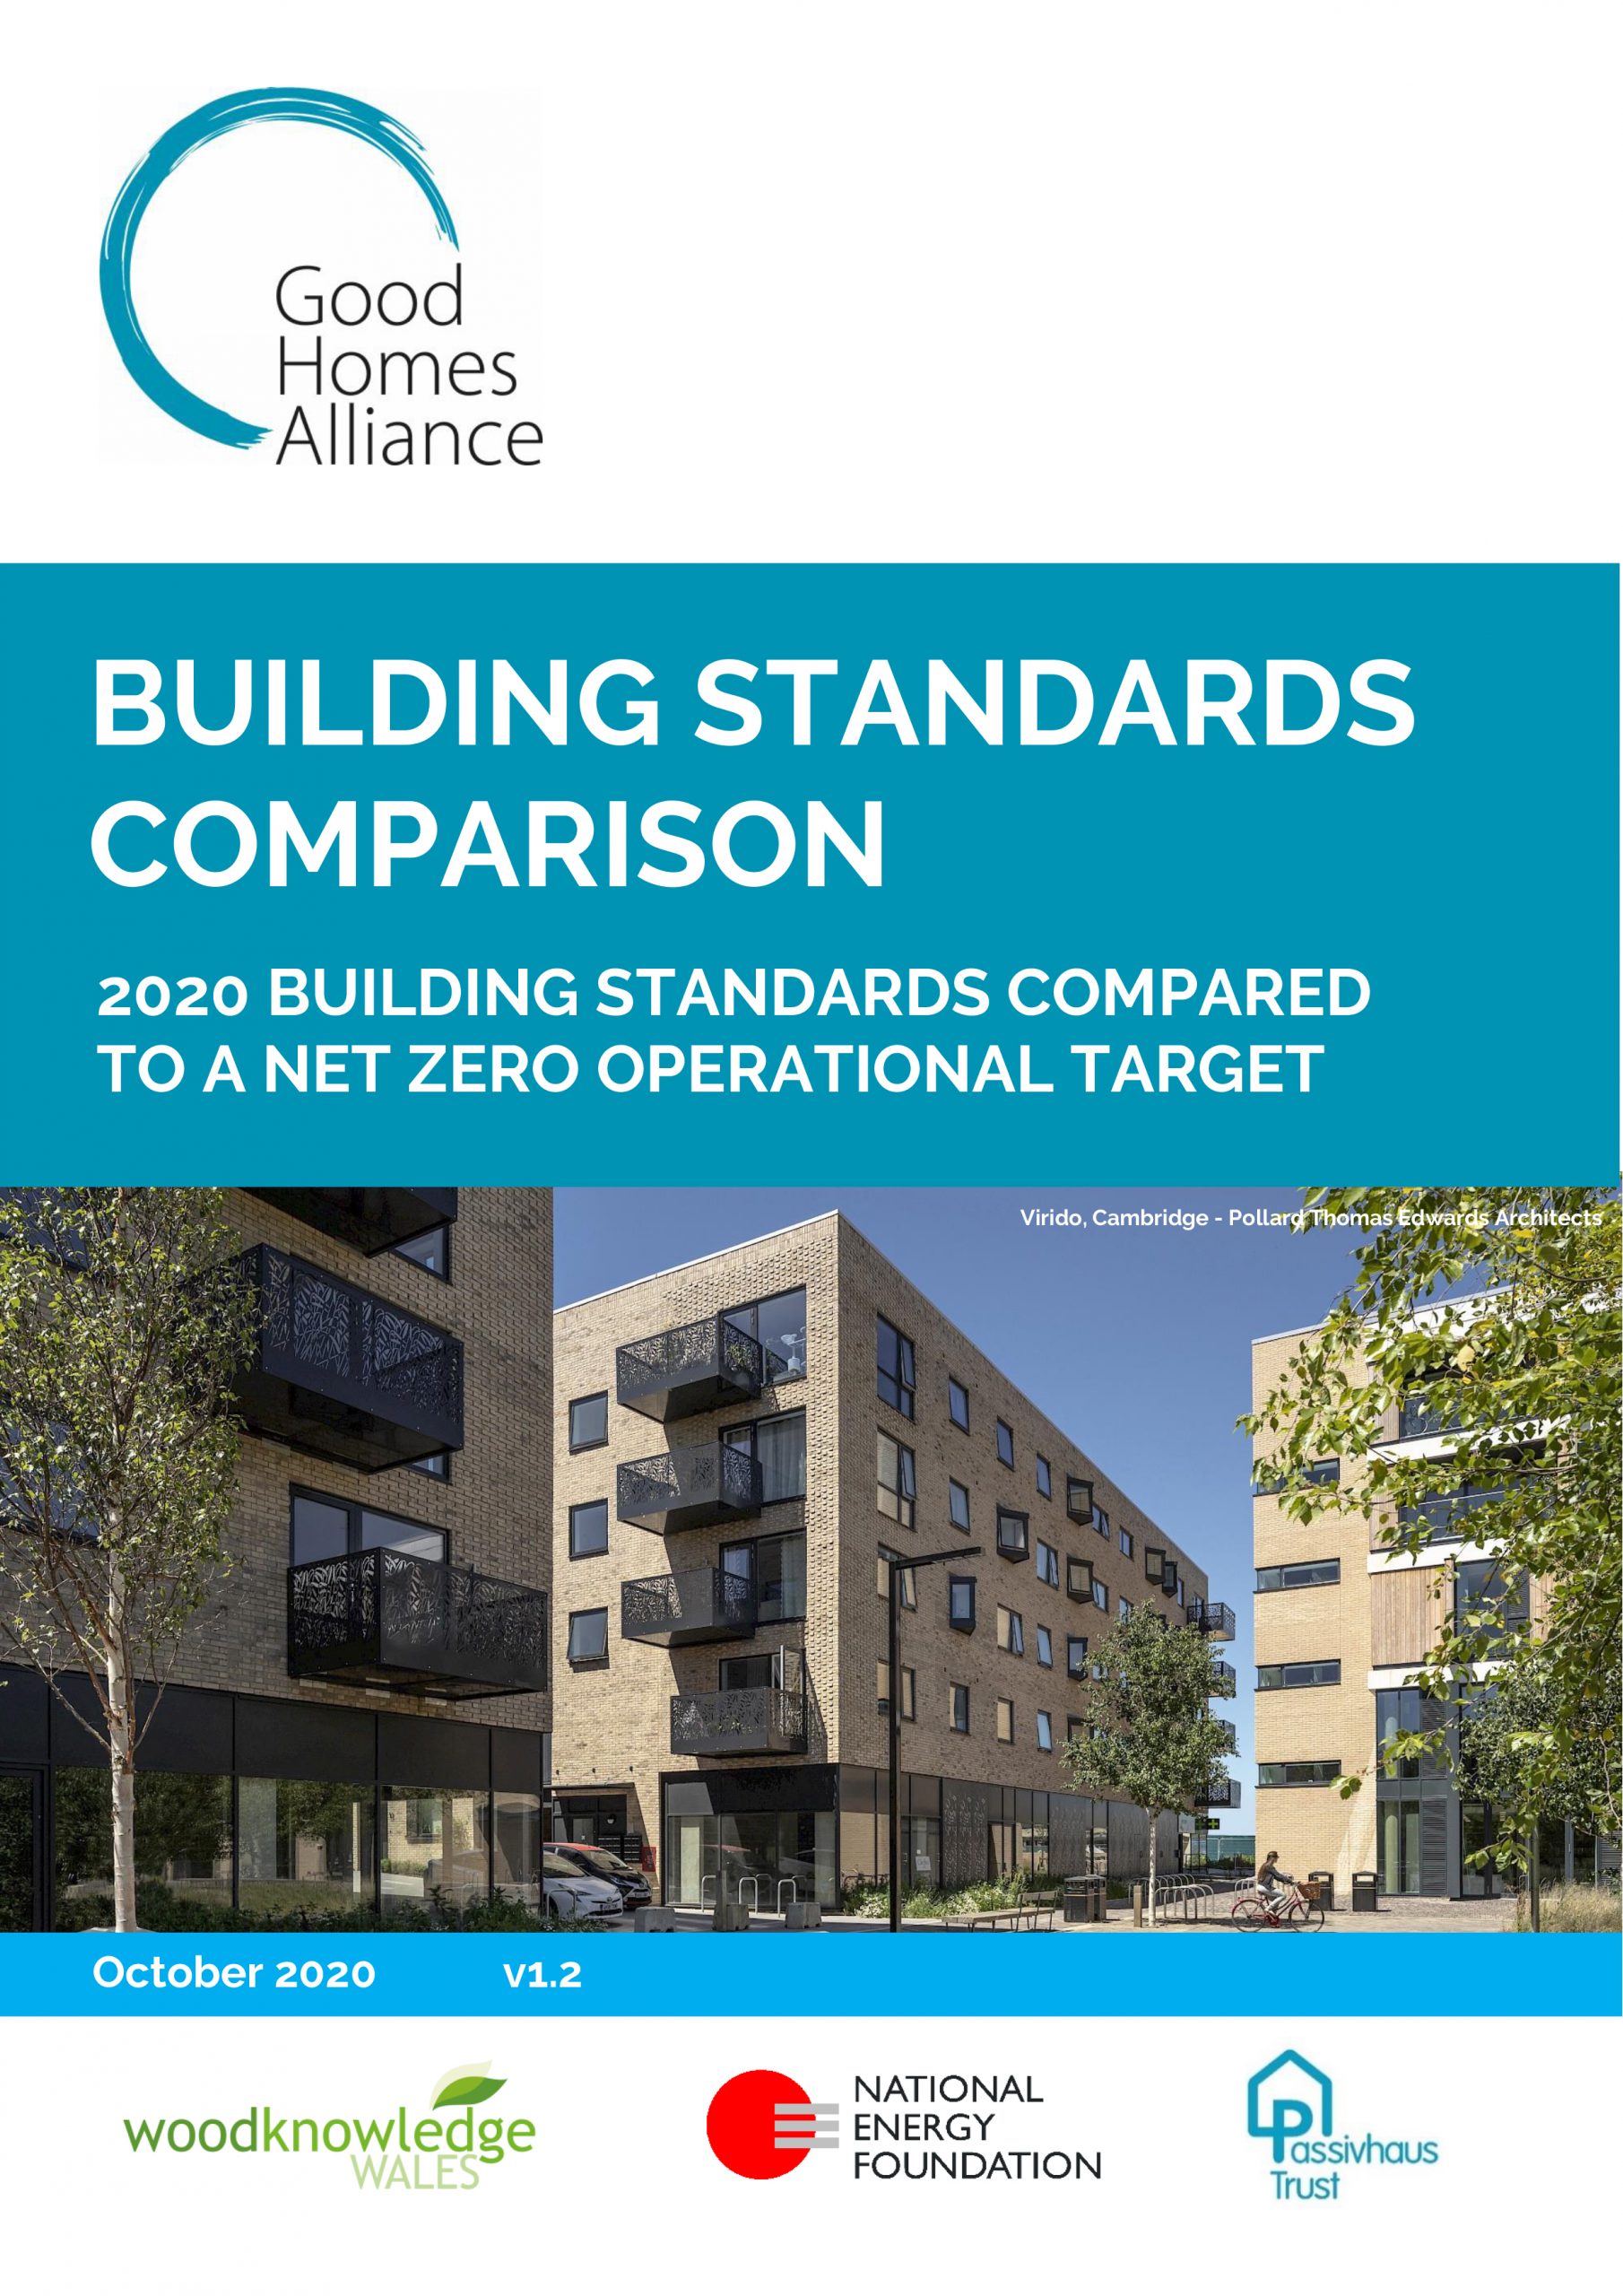 Building Standards Compared